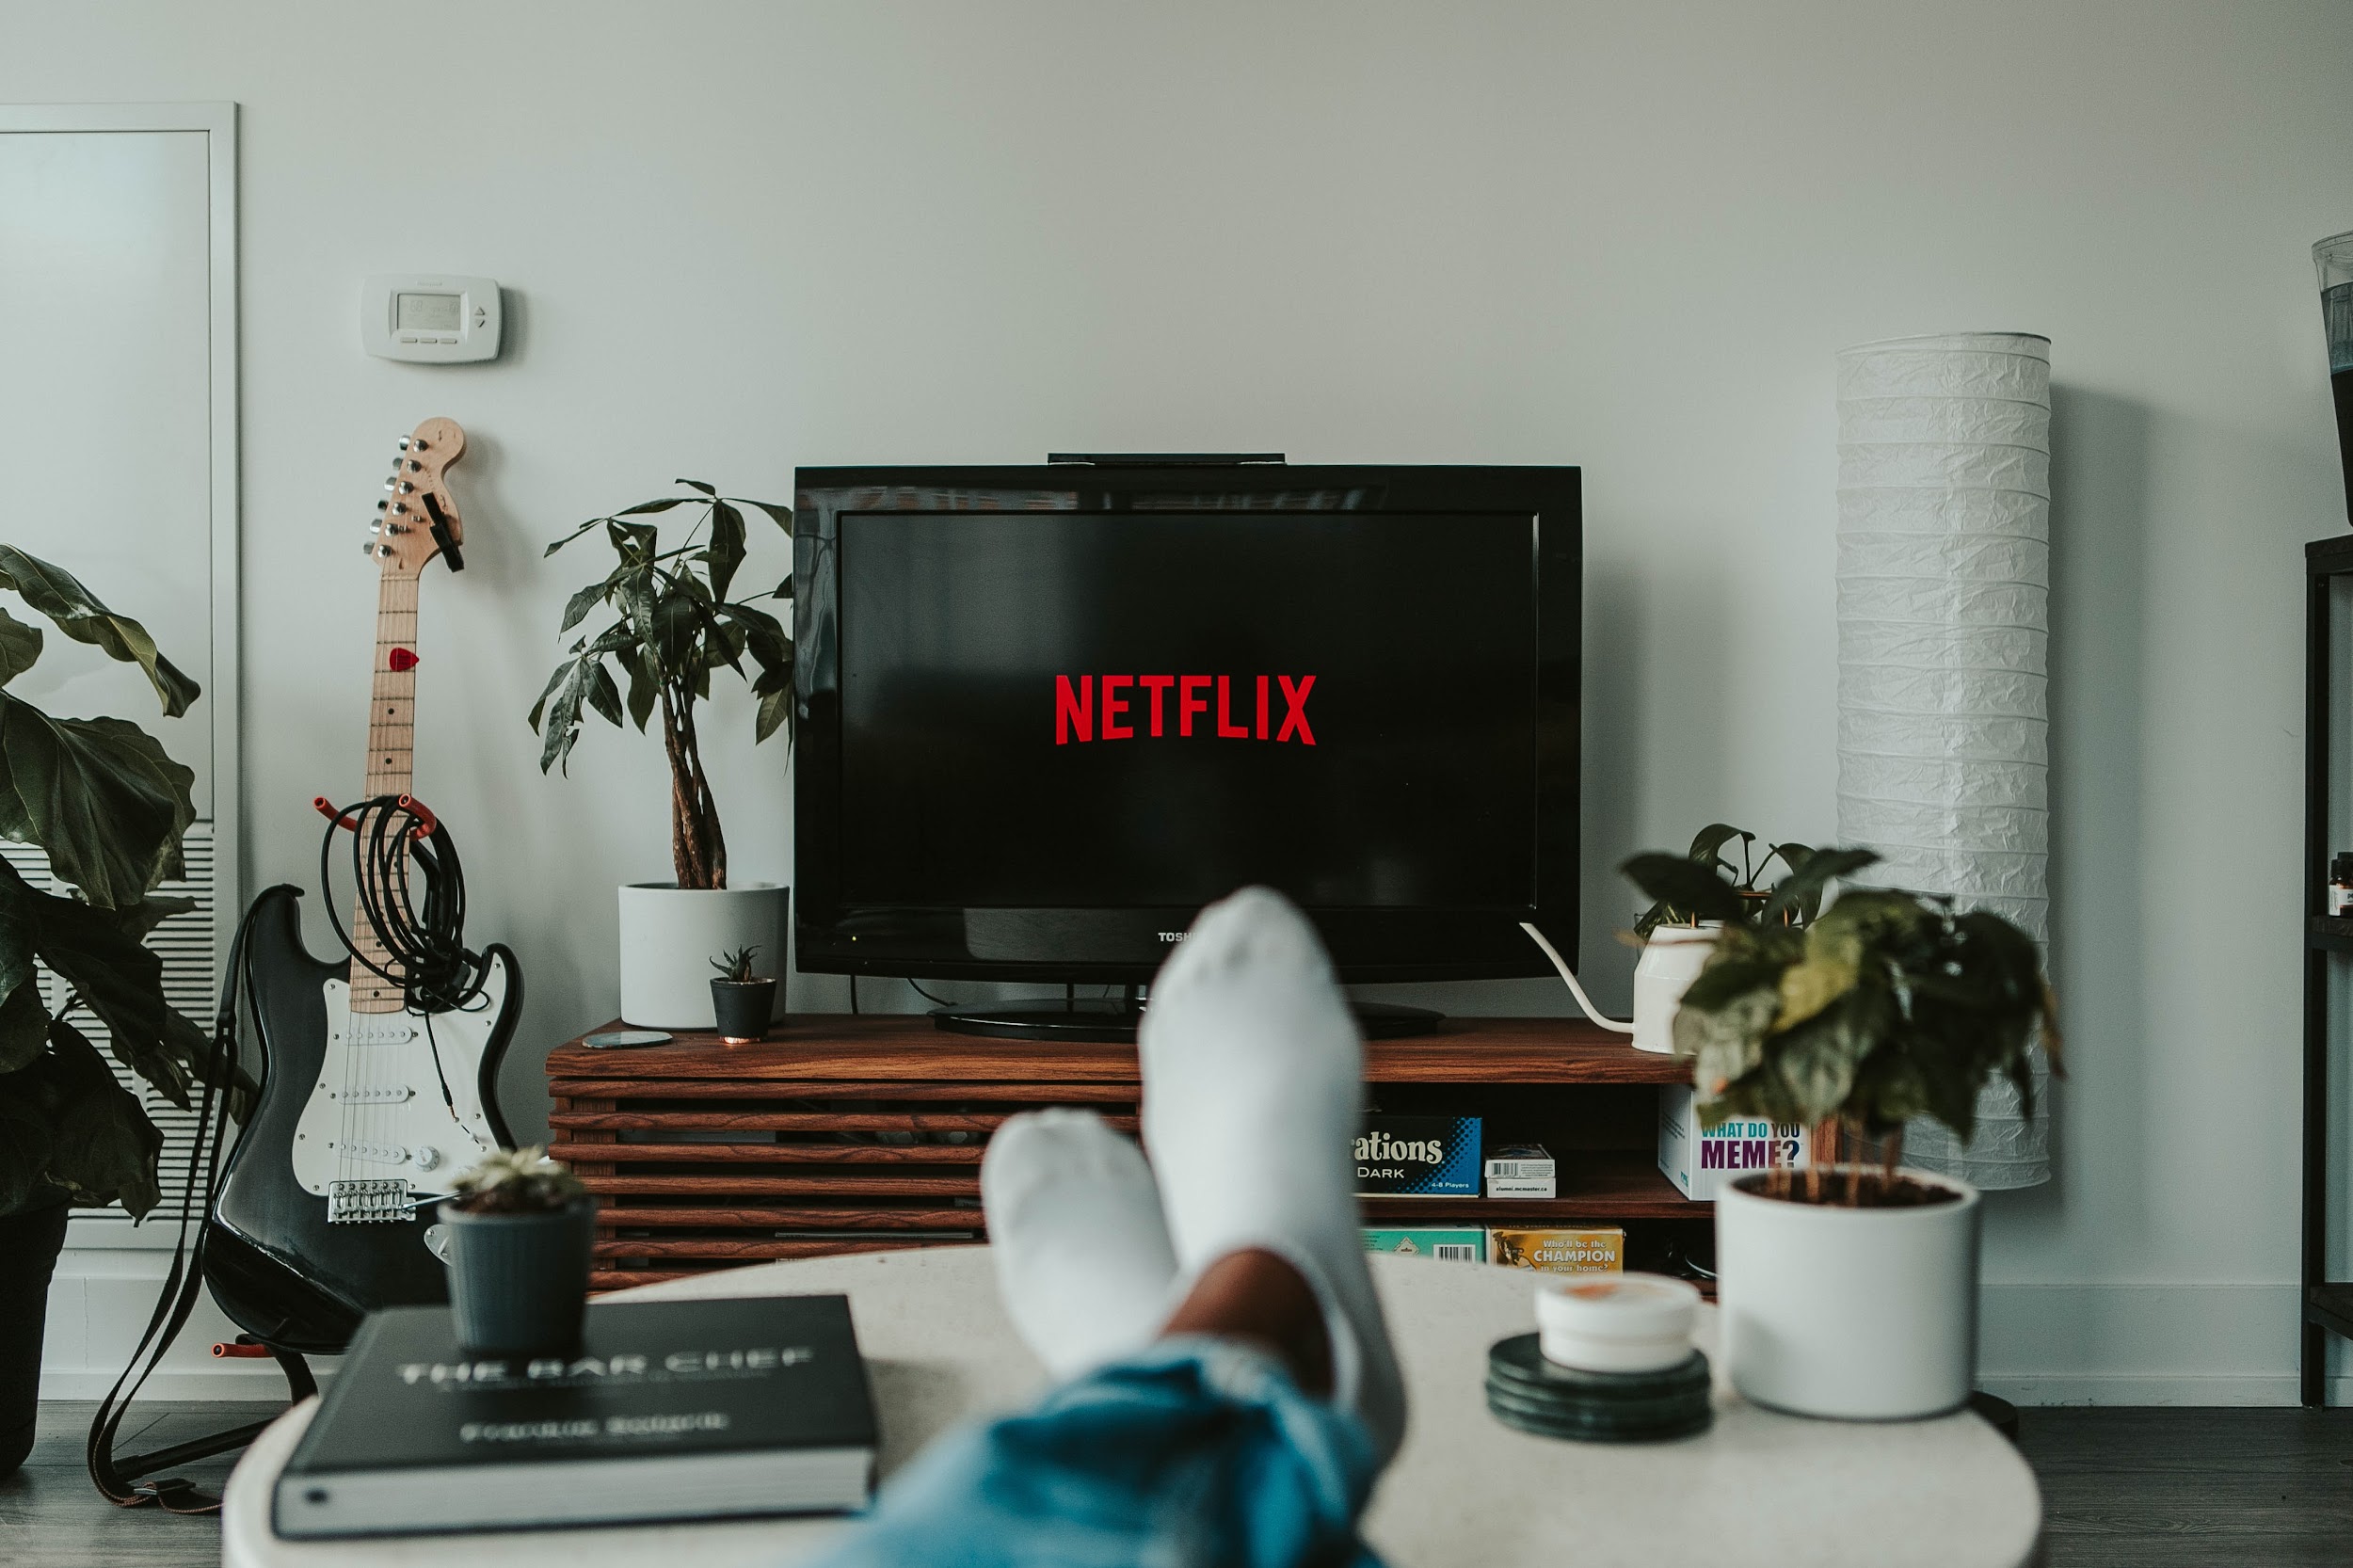 A picture of a pair of feet on a table in front of a TV with Netflix OTT network logo taken from the feet owner's perspective.